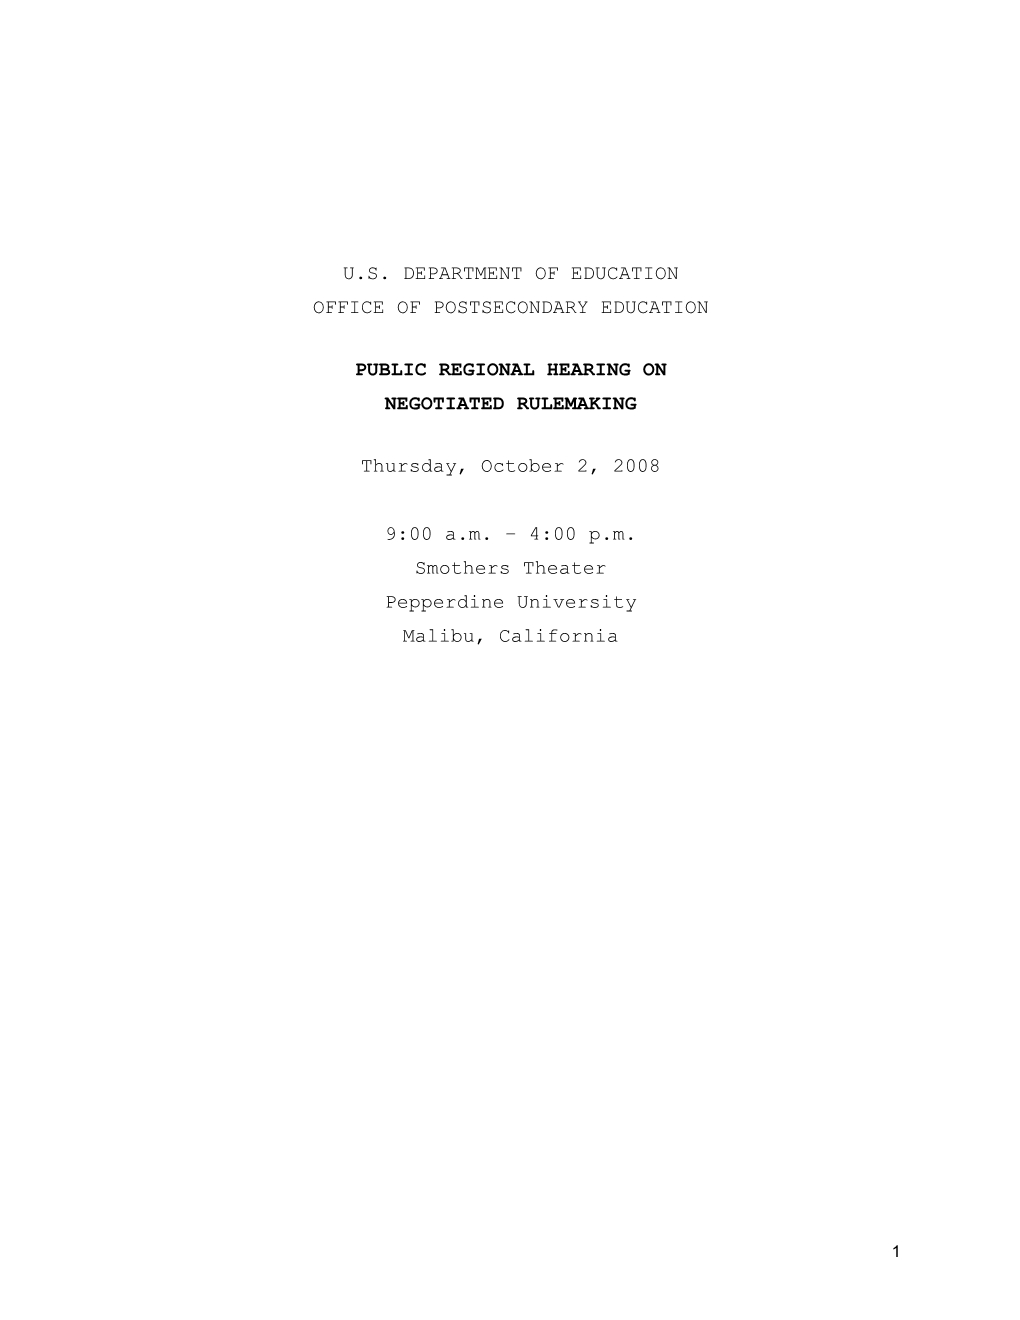 Public Regional Hearing on Negotiated Rulemaking - October 2, 2008 (MS Word)